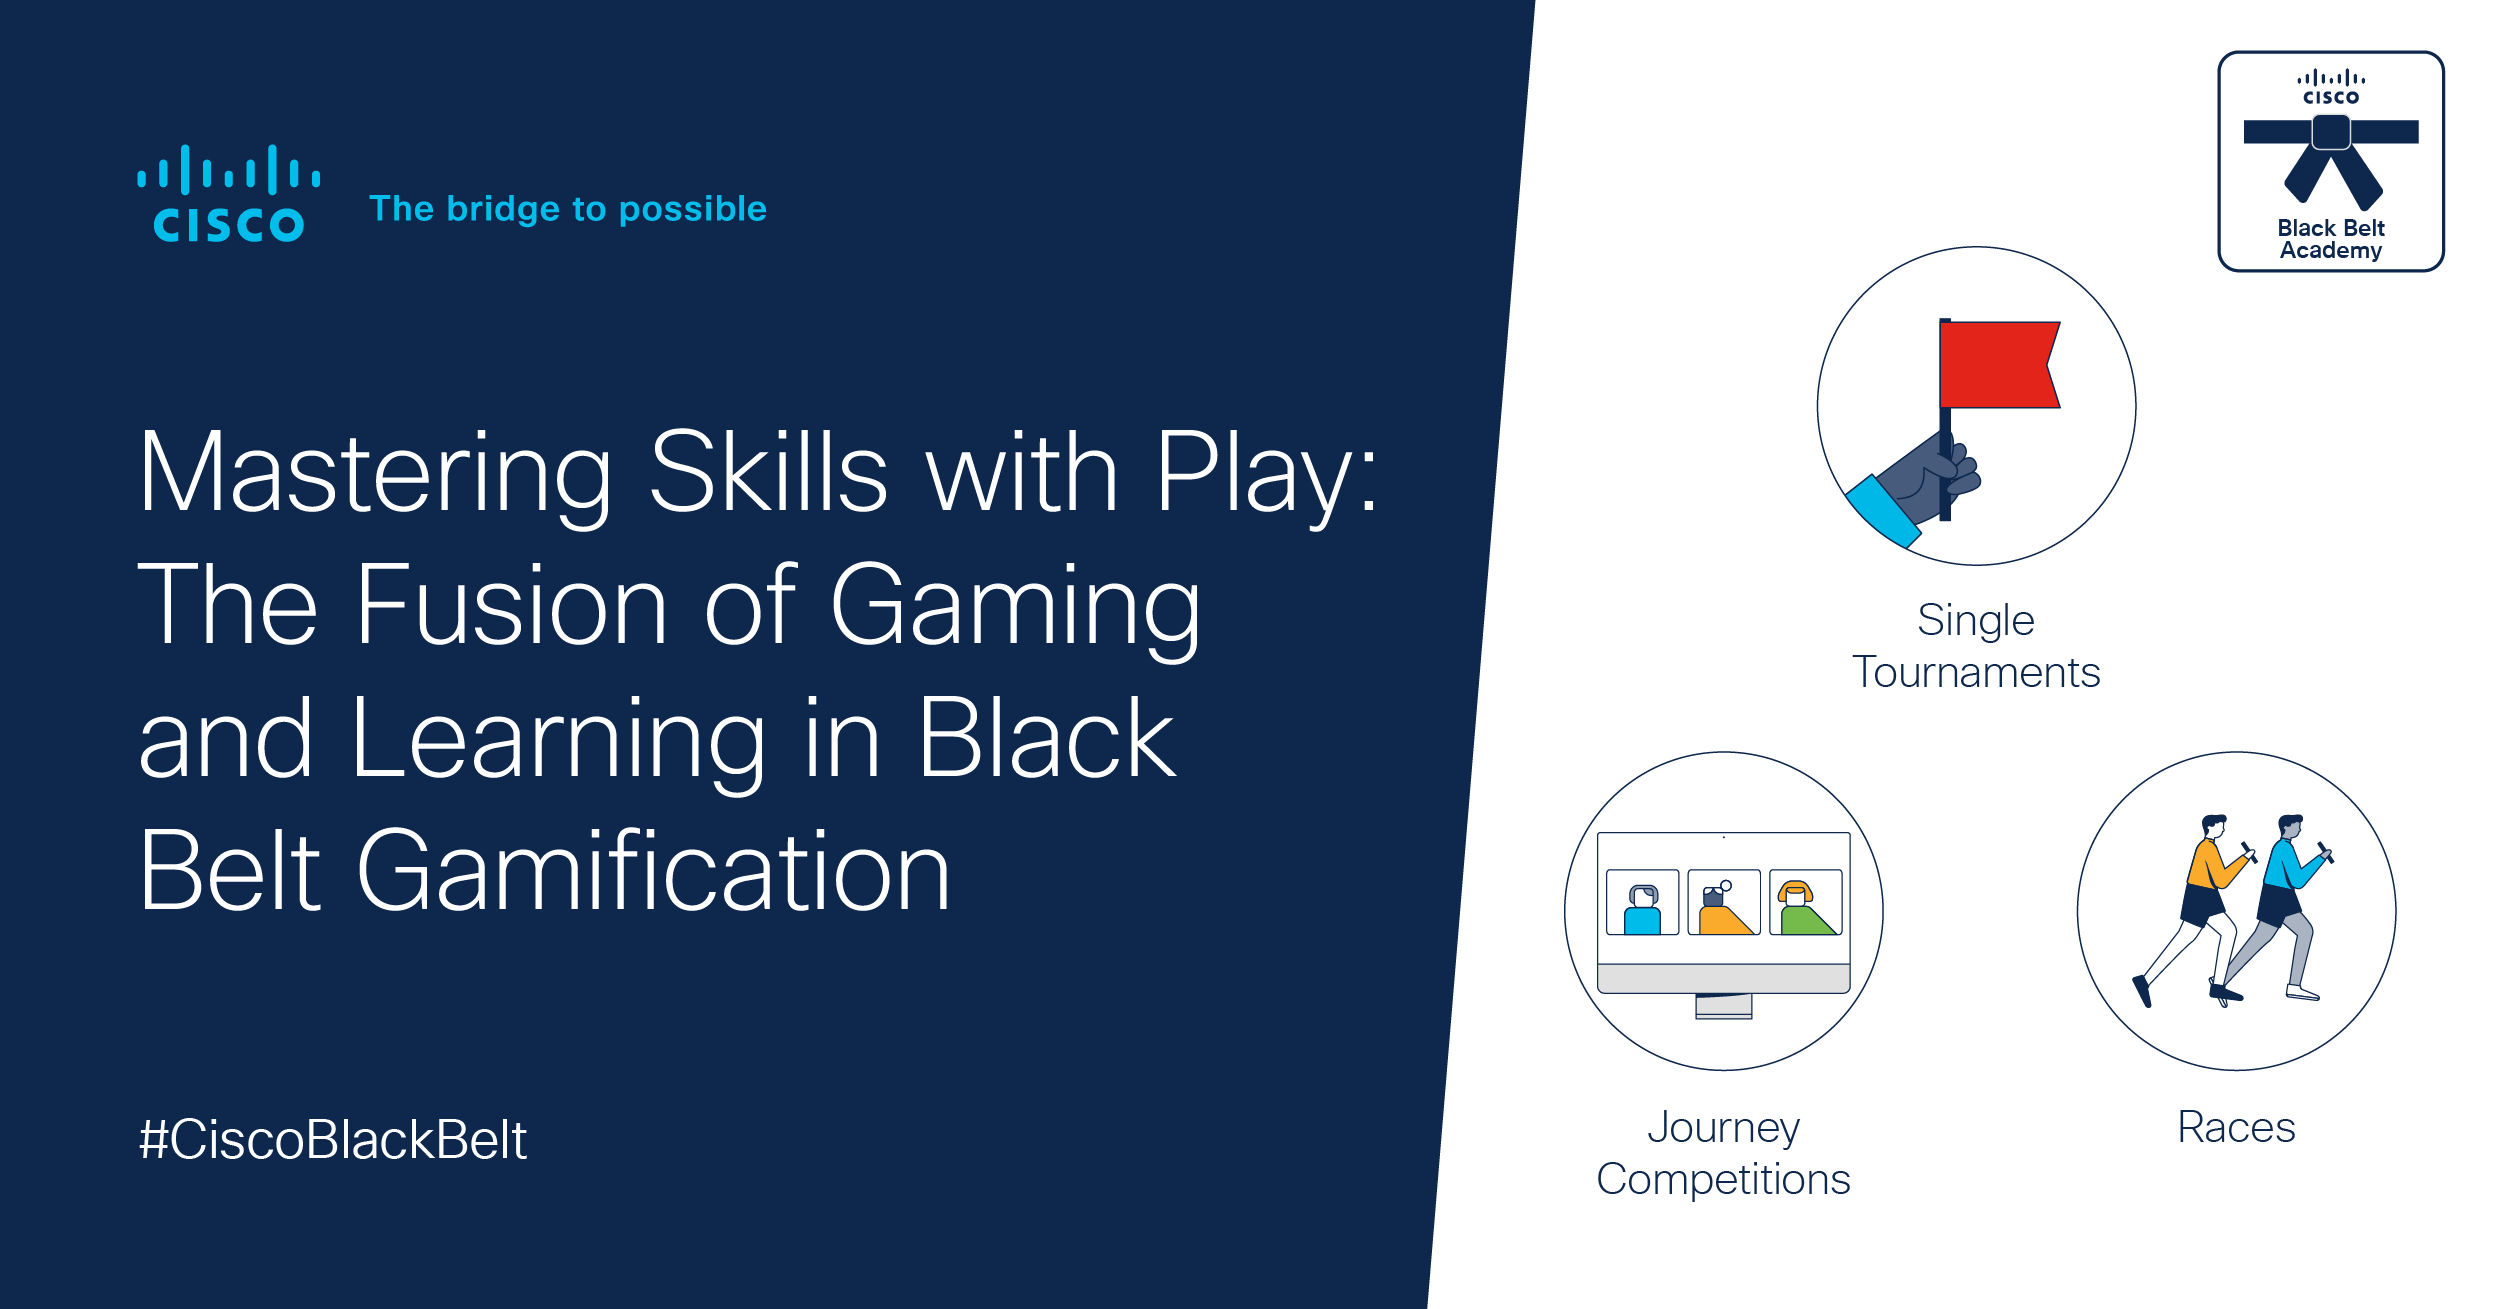 Mastering Skills with Play: The Fusion of Gaming and Learning in Black Belt Gamification